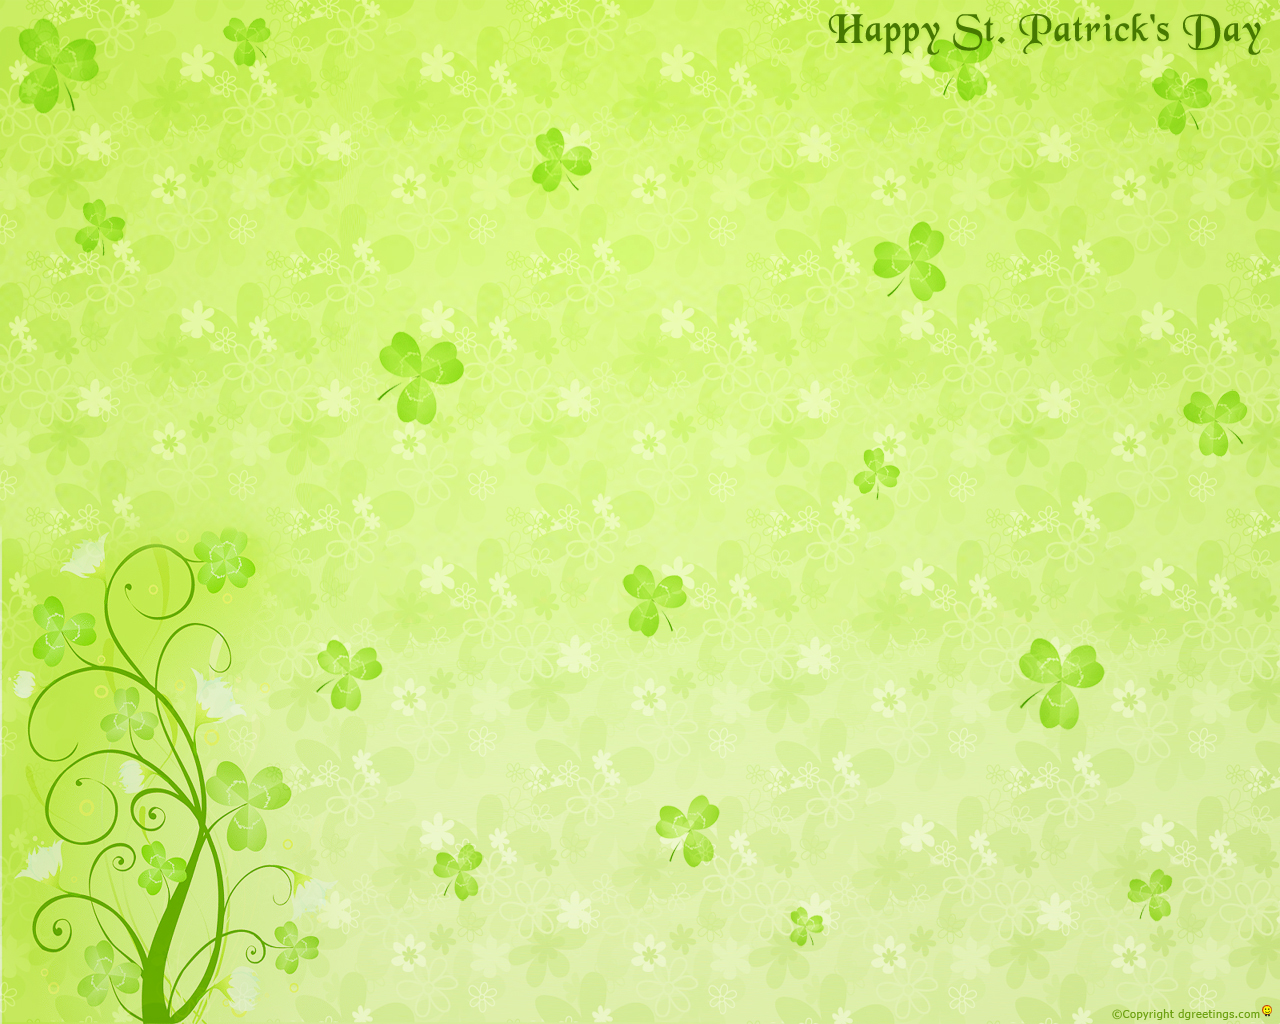 st patrick day images pictures - Latest Updates